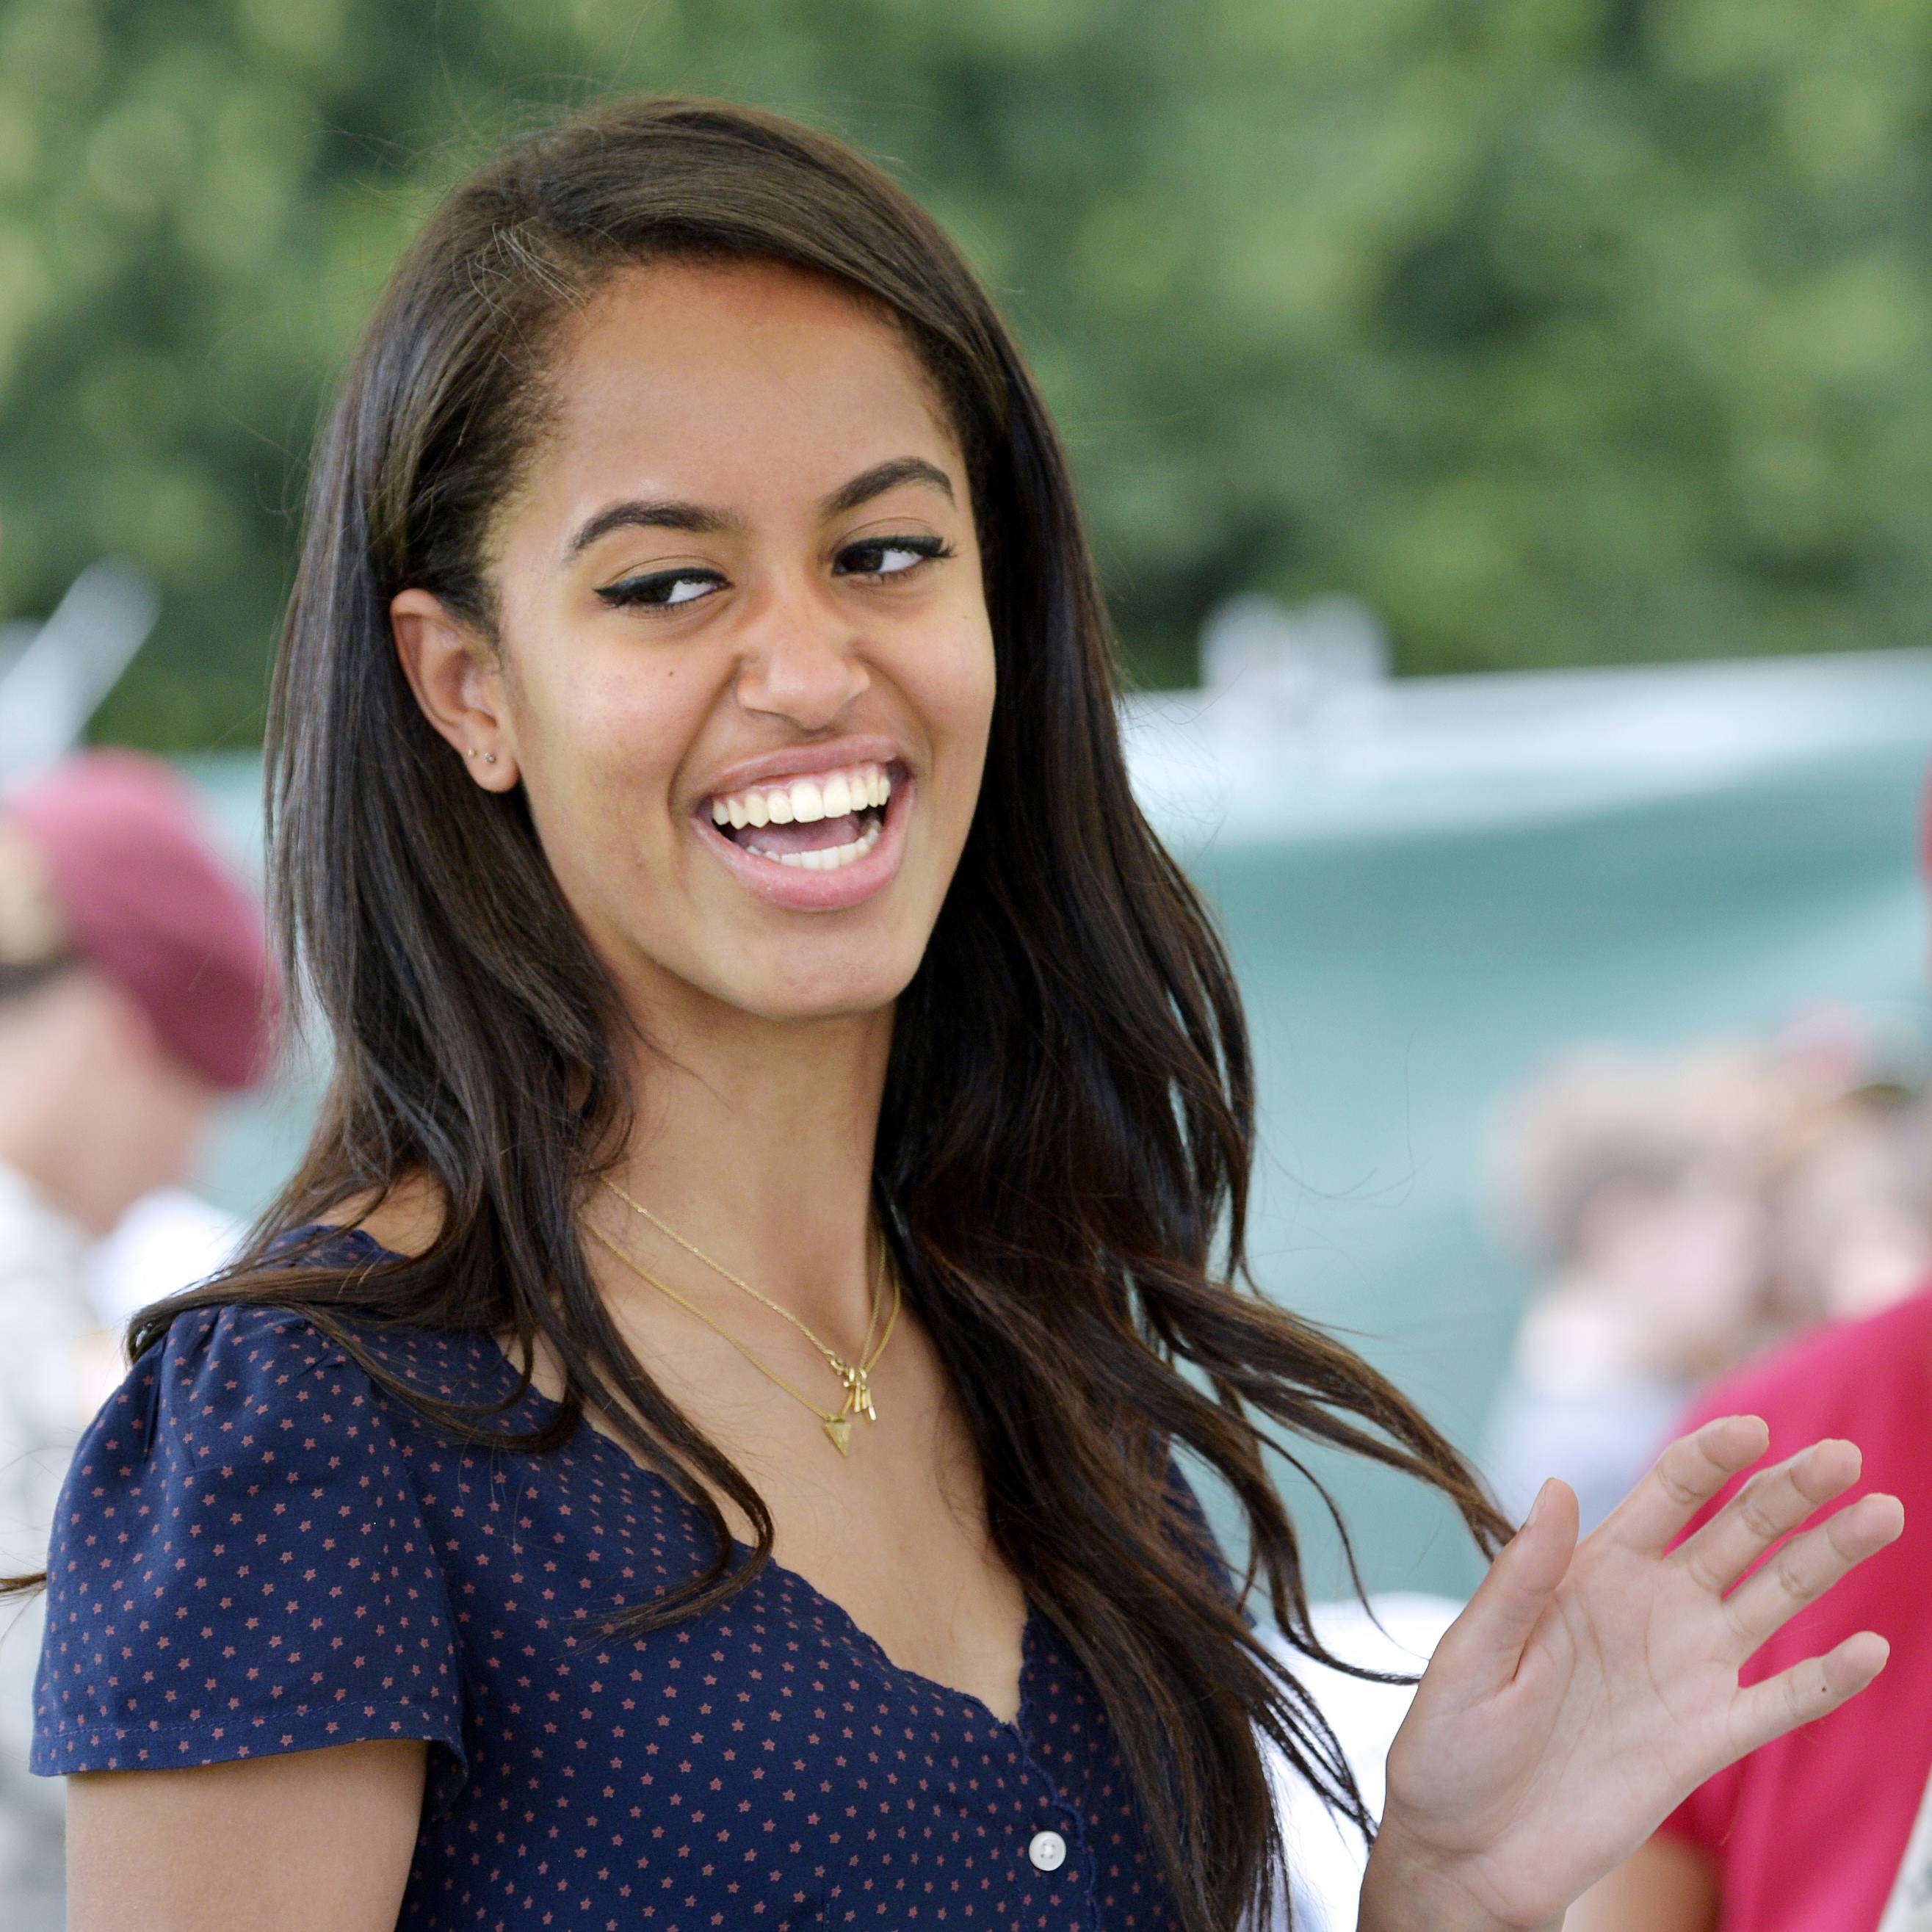 Map to Malia Obama's Summer in NYC